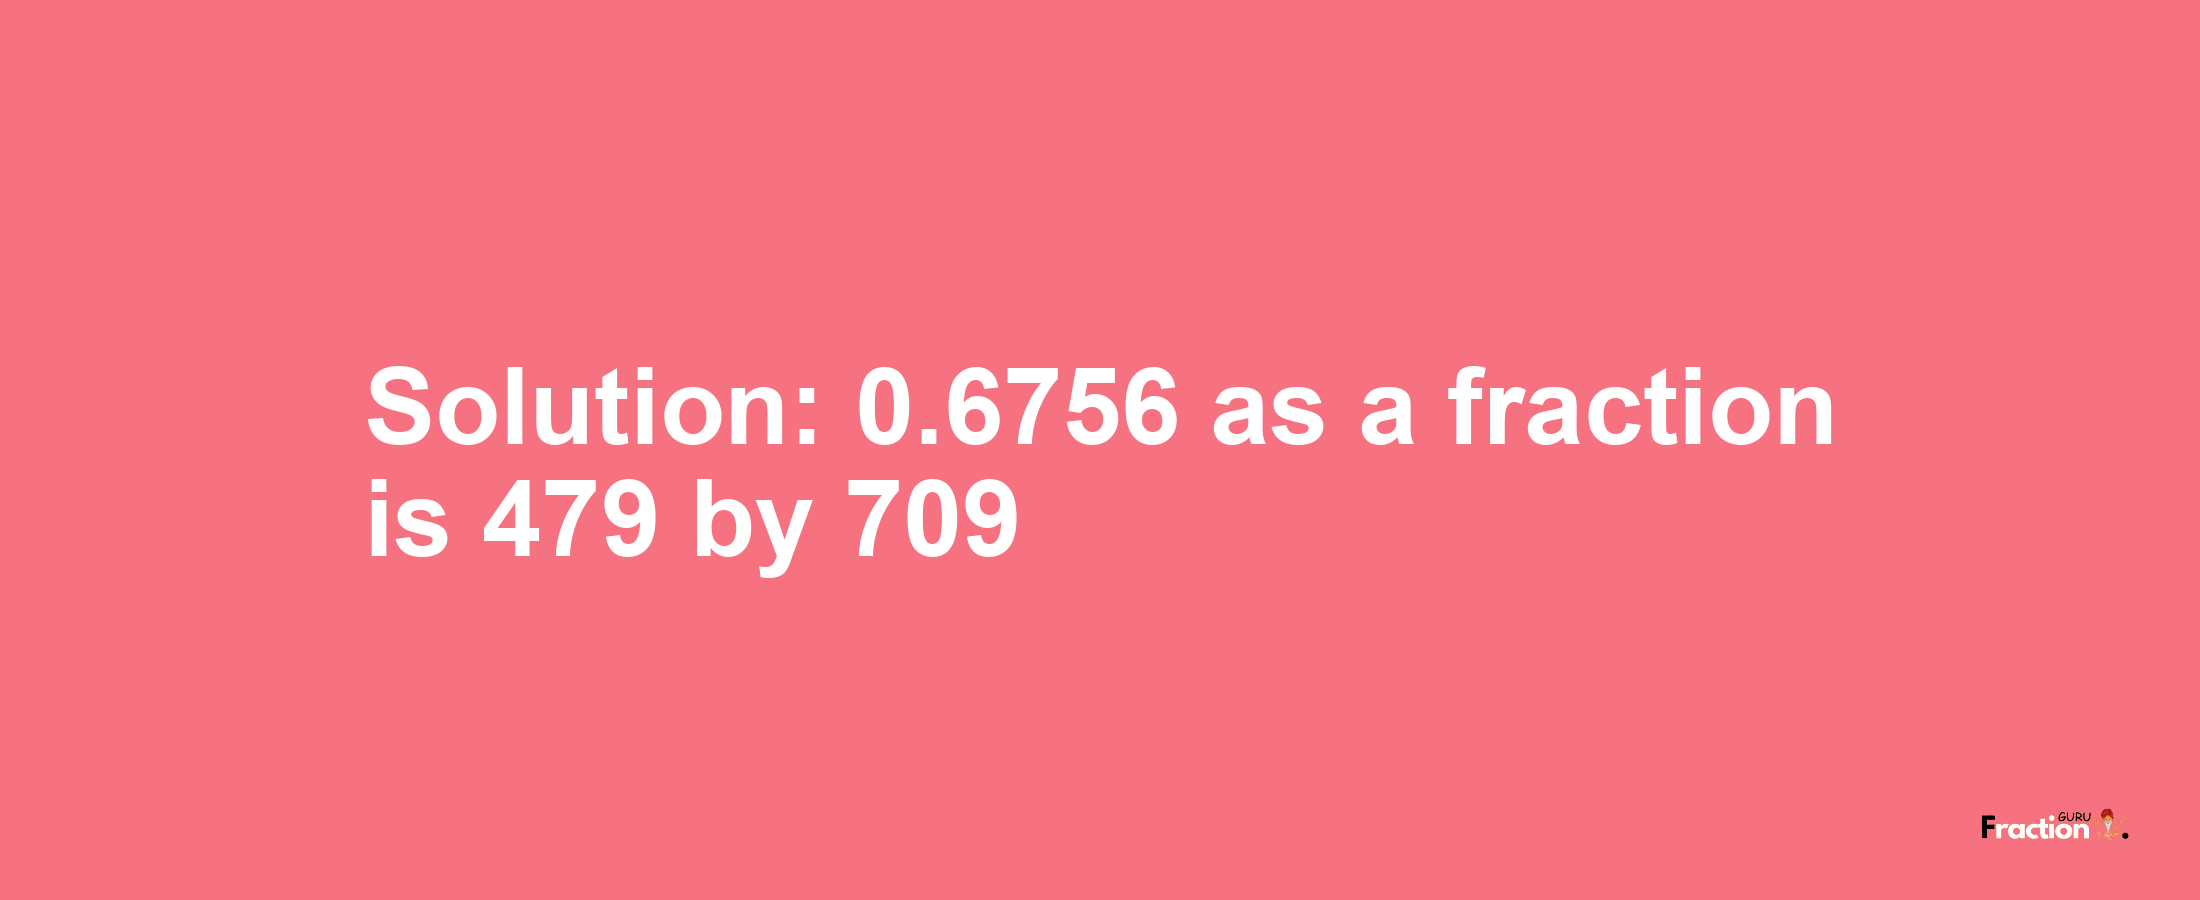 Solution:0.6756 as a fraction is 479/709